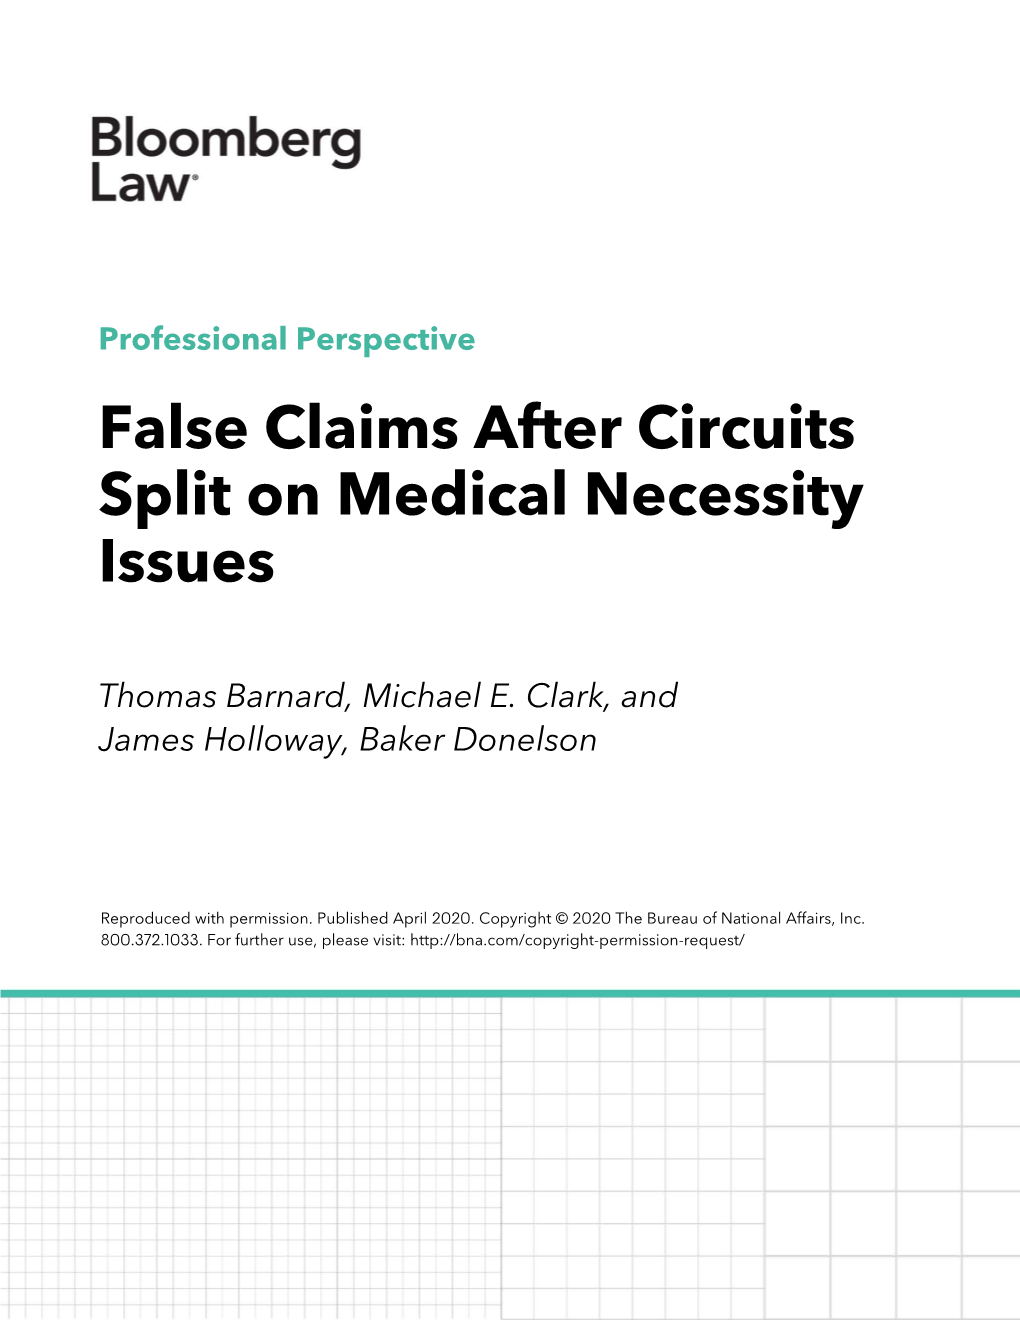 False Claims After Circuits Split on Medical Necessity Issues